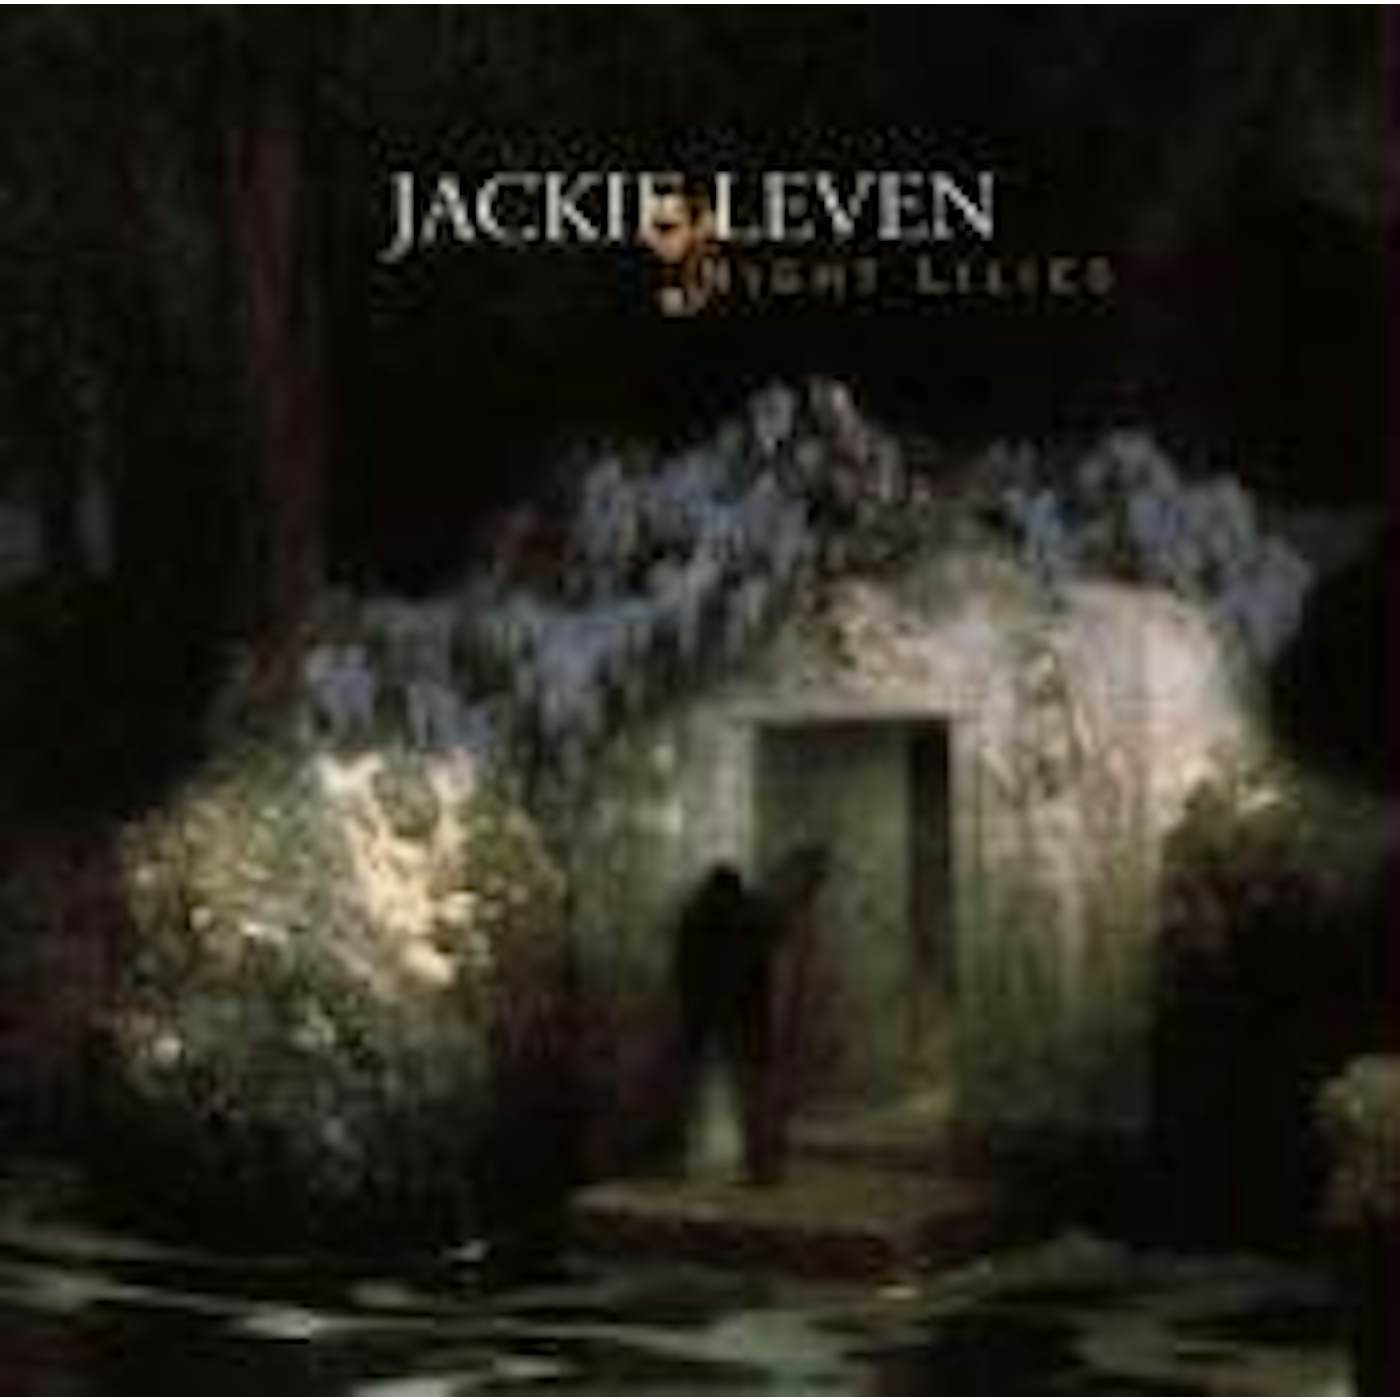 Jackie Leven NIGHT LILIES CD